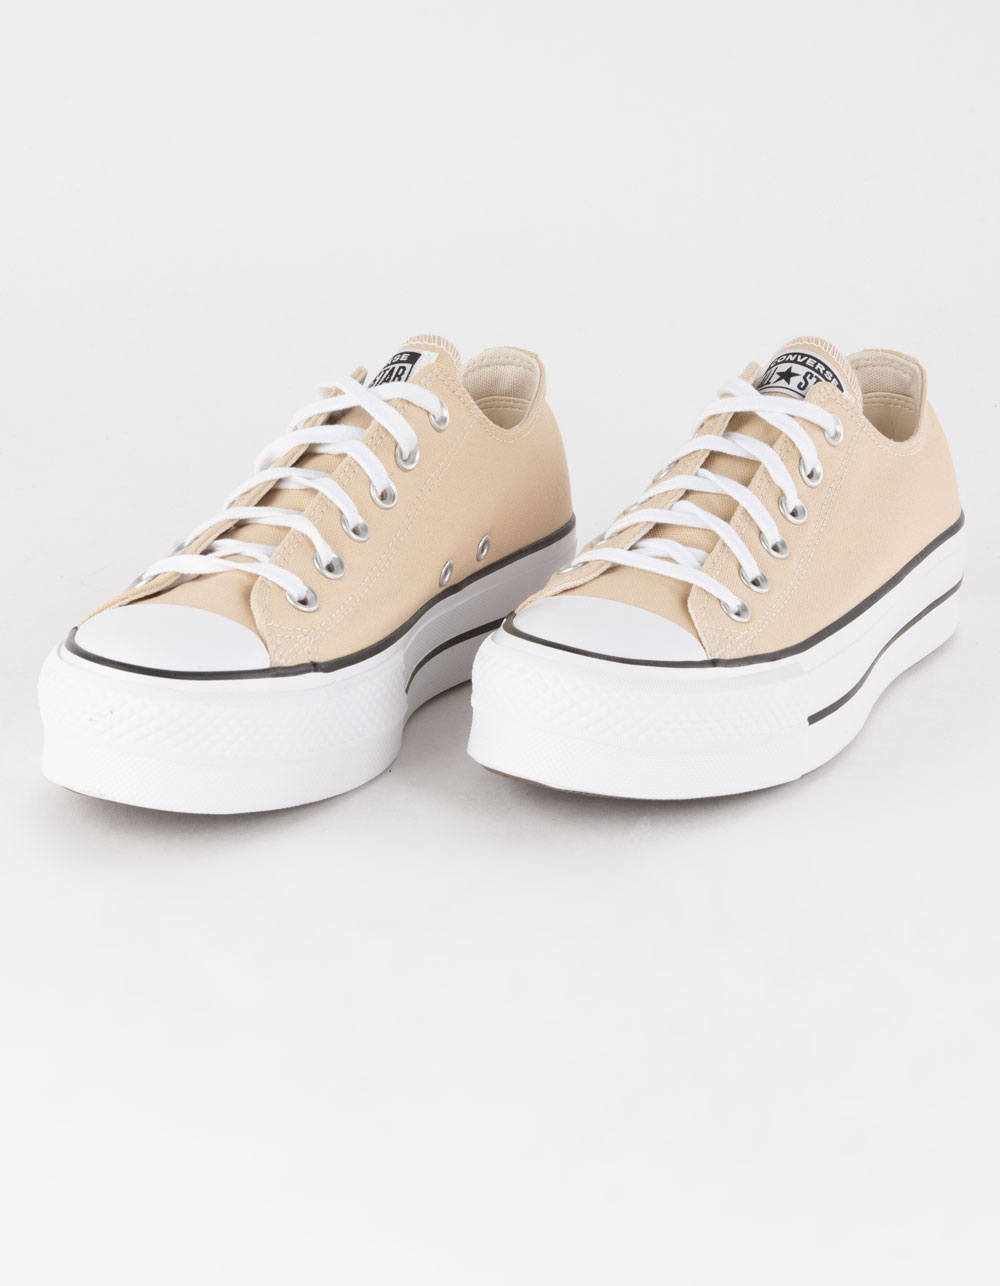 Chuck Taylor All Star Unisex Low Top Shoe.